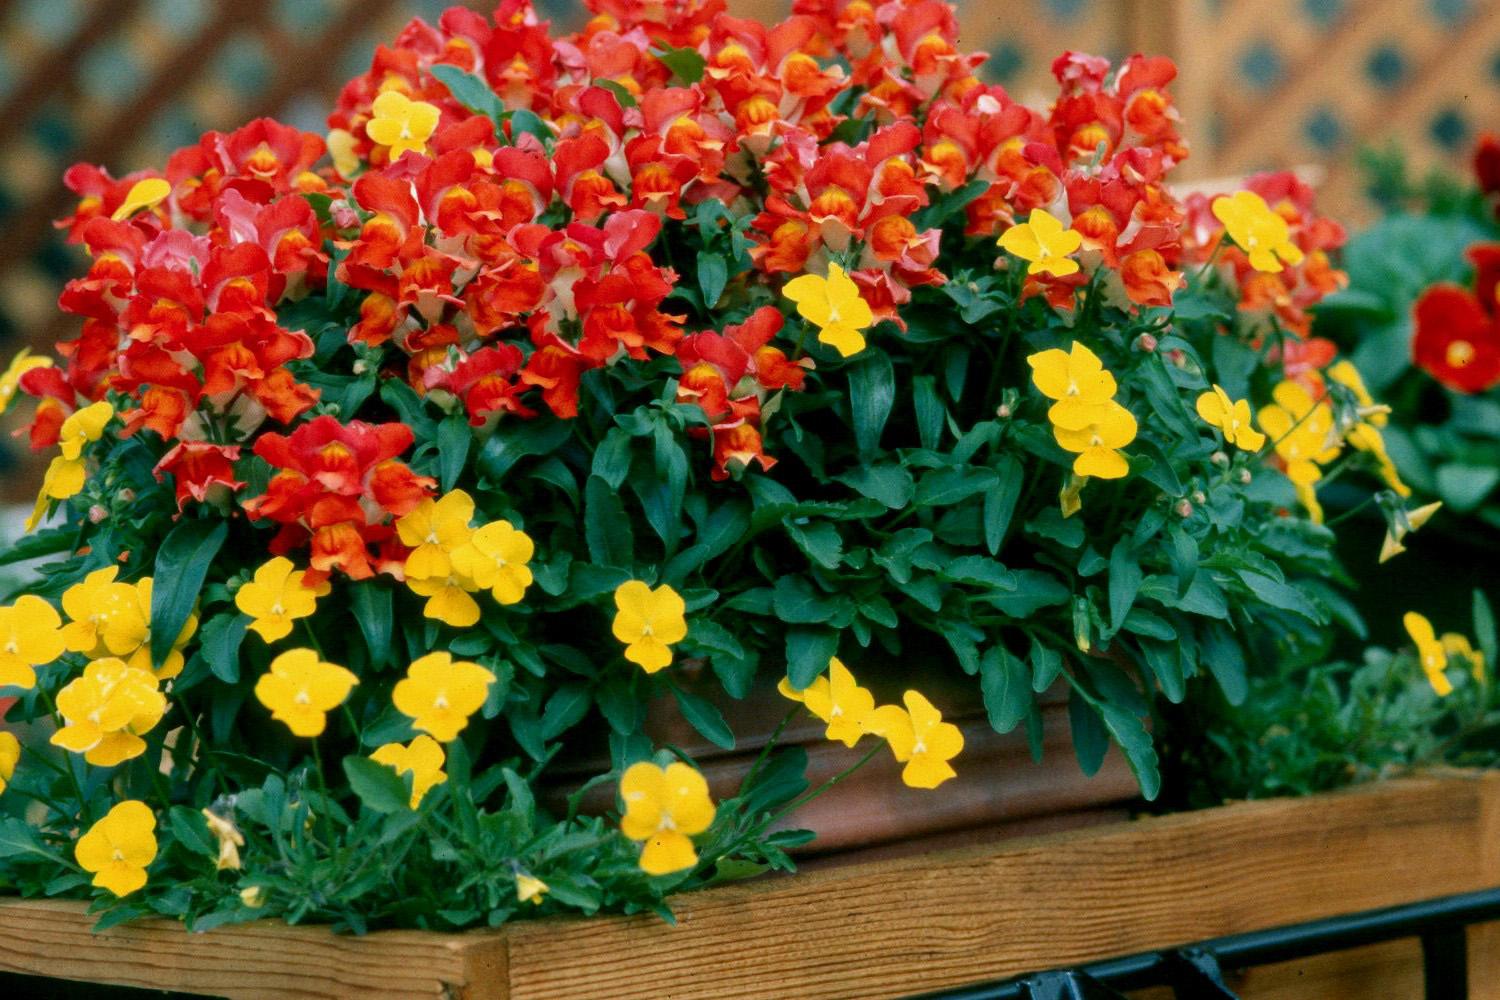 Dwarf Montego snapdragons and yellow pansies create a mixed container that would brighten any porch, patio or deck.